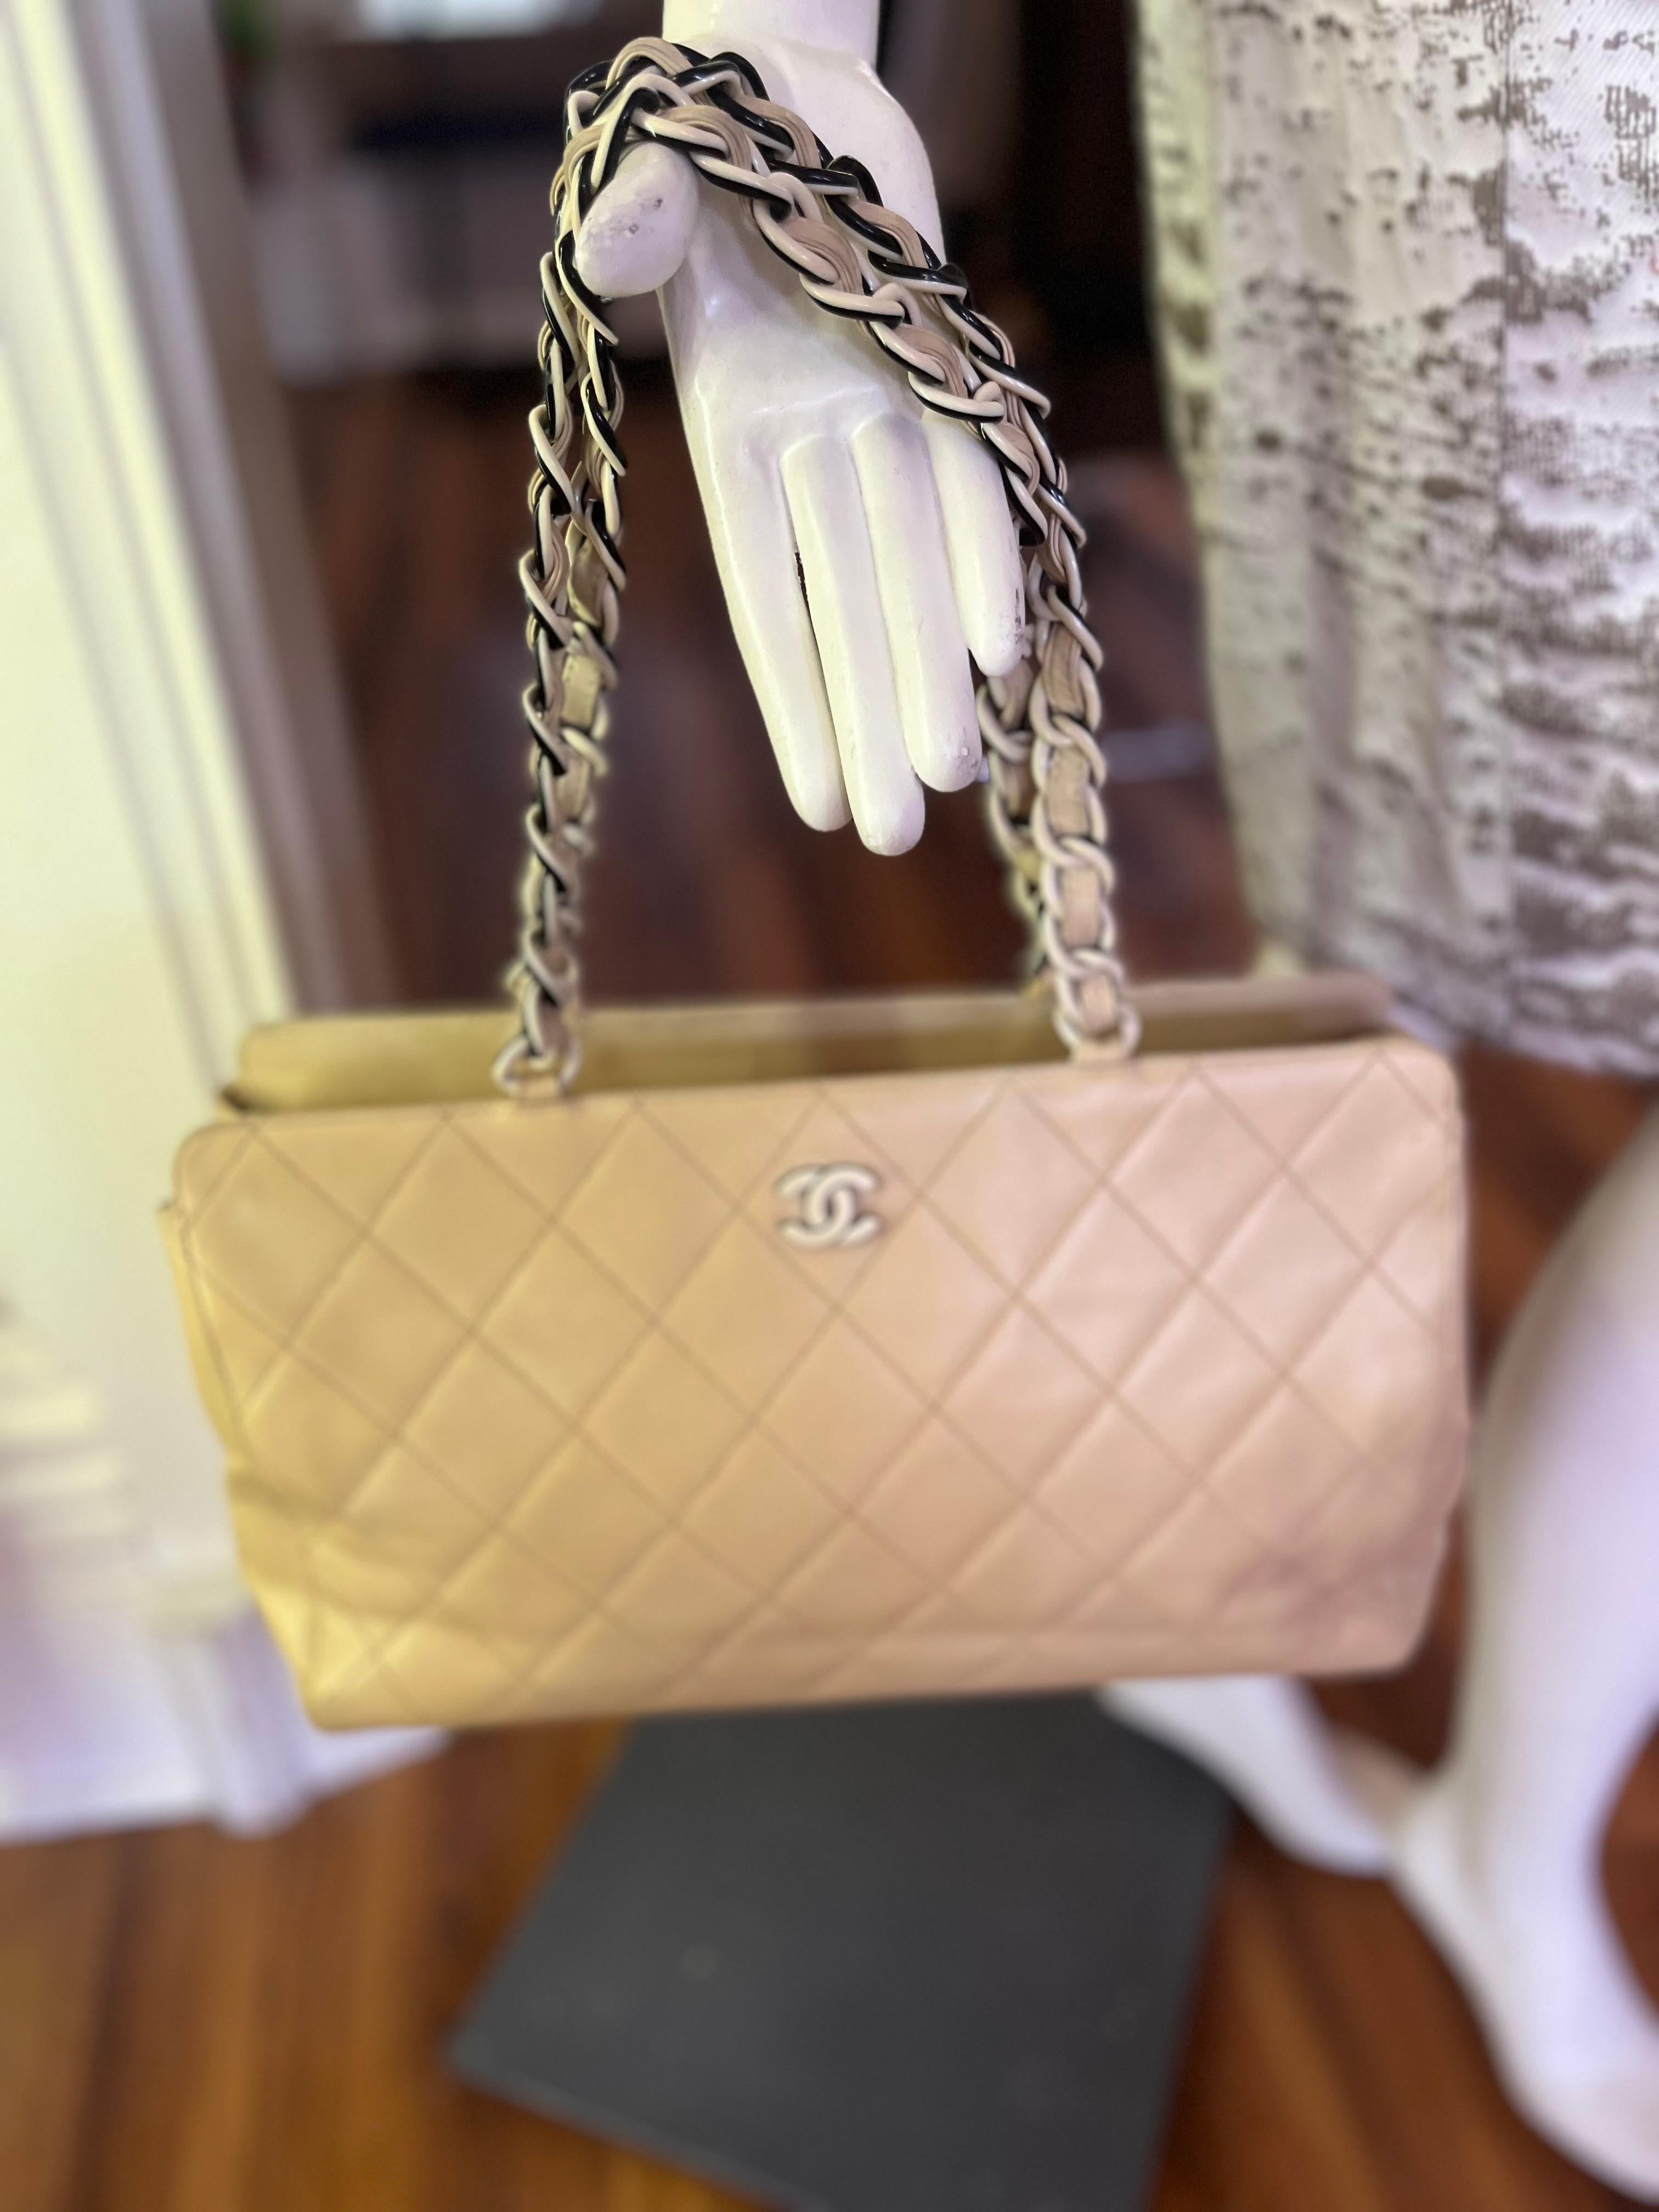  A very light beige (with a hint of yellow) quilted lambskin tote bag with a nice two colored interlocking chain; a ceramic CC at the front; a top zip; leather lining; two inside pocket, one with a zip, and serial#6497588 inside the zip pocket.
It